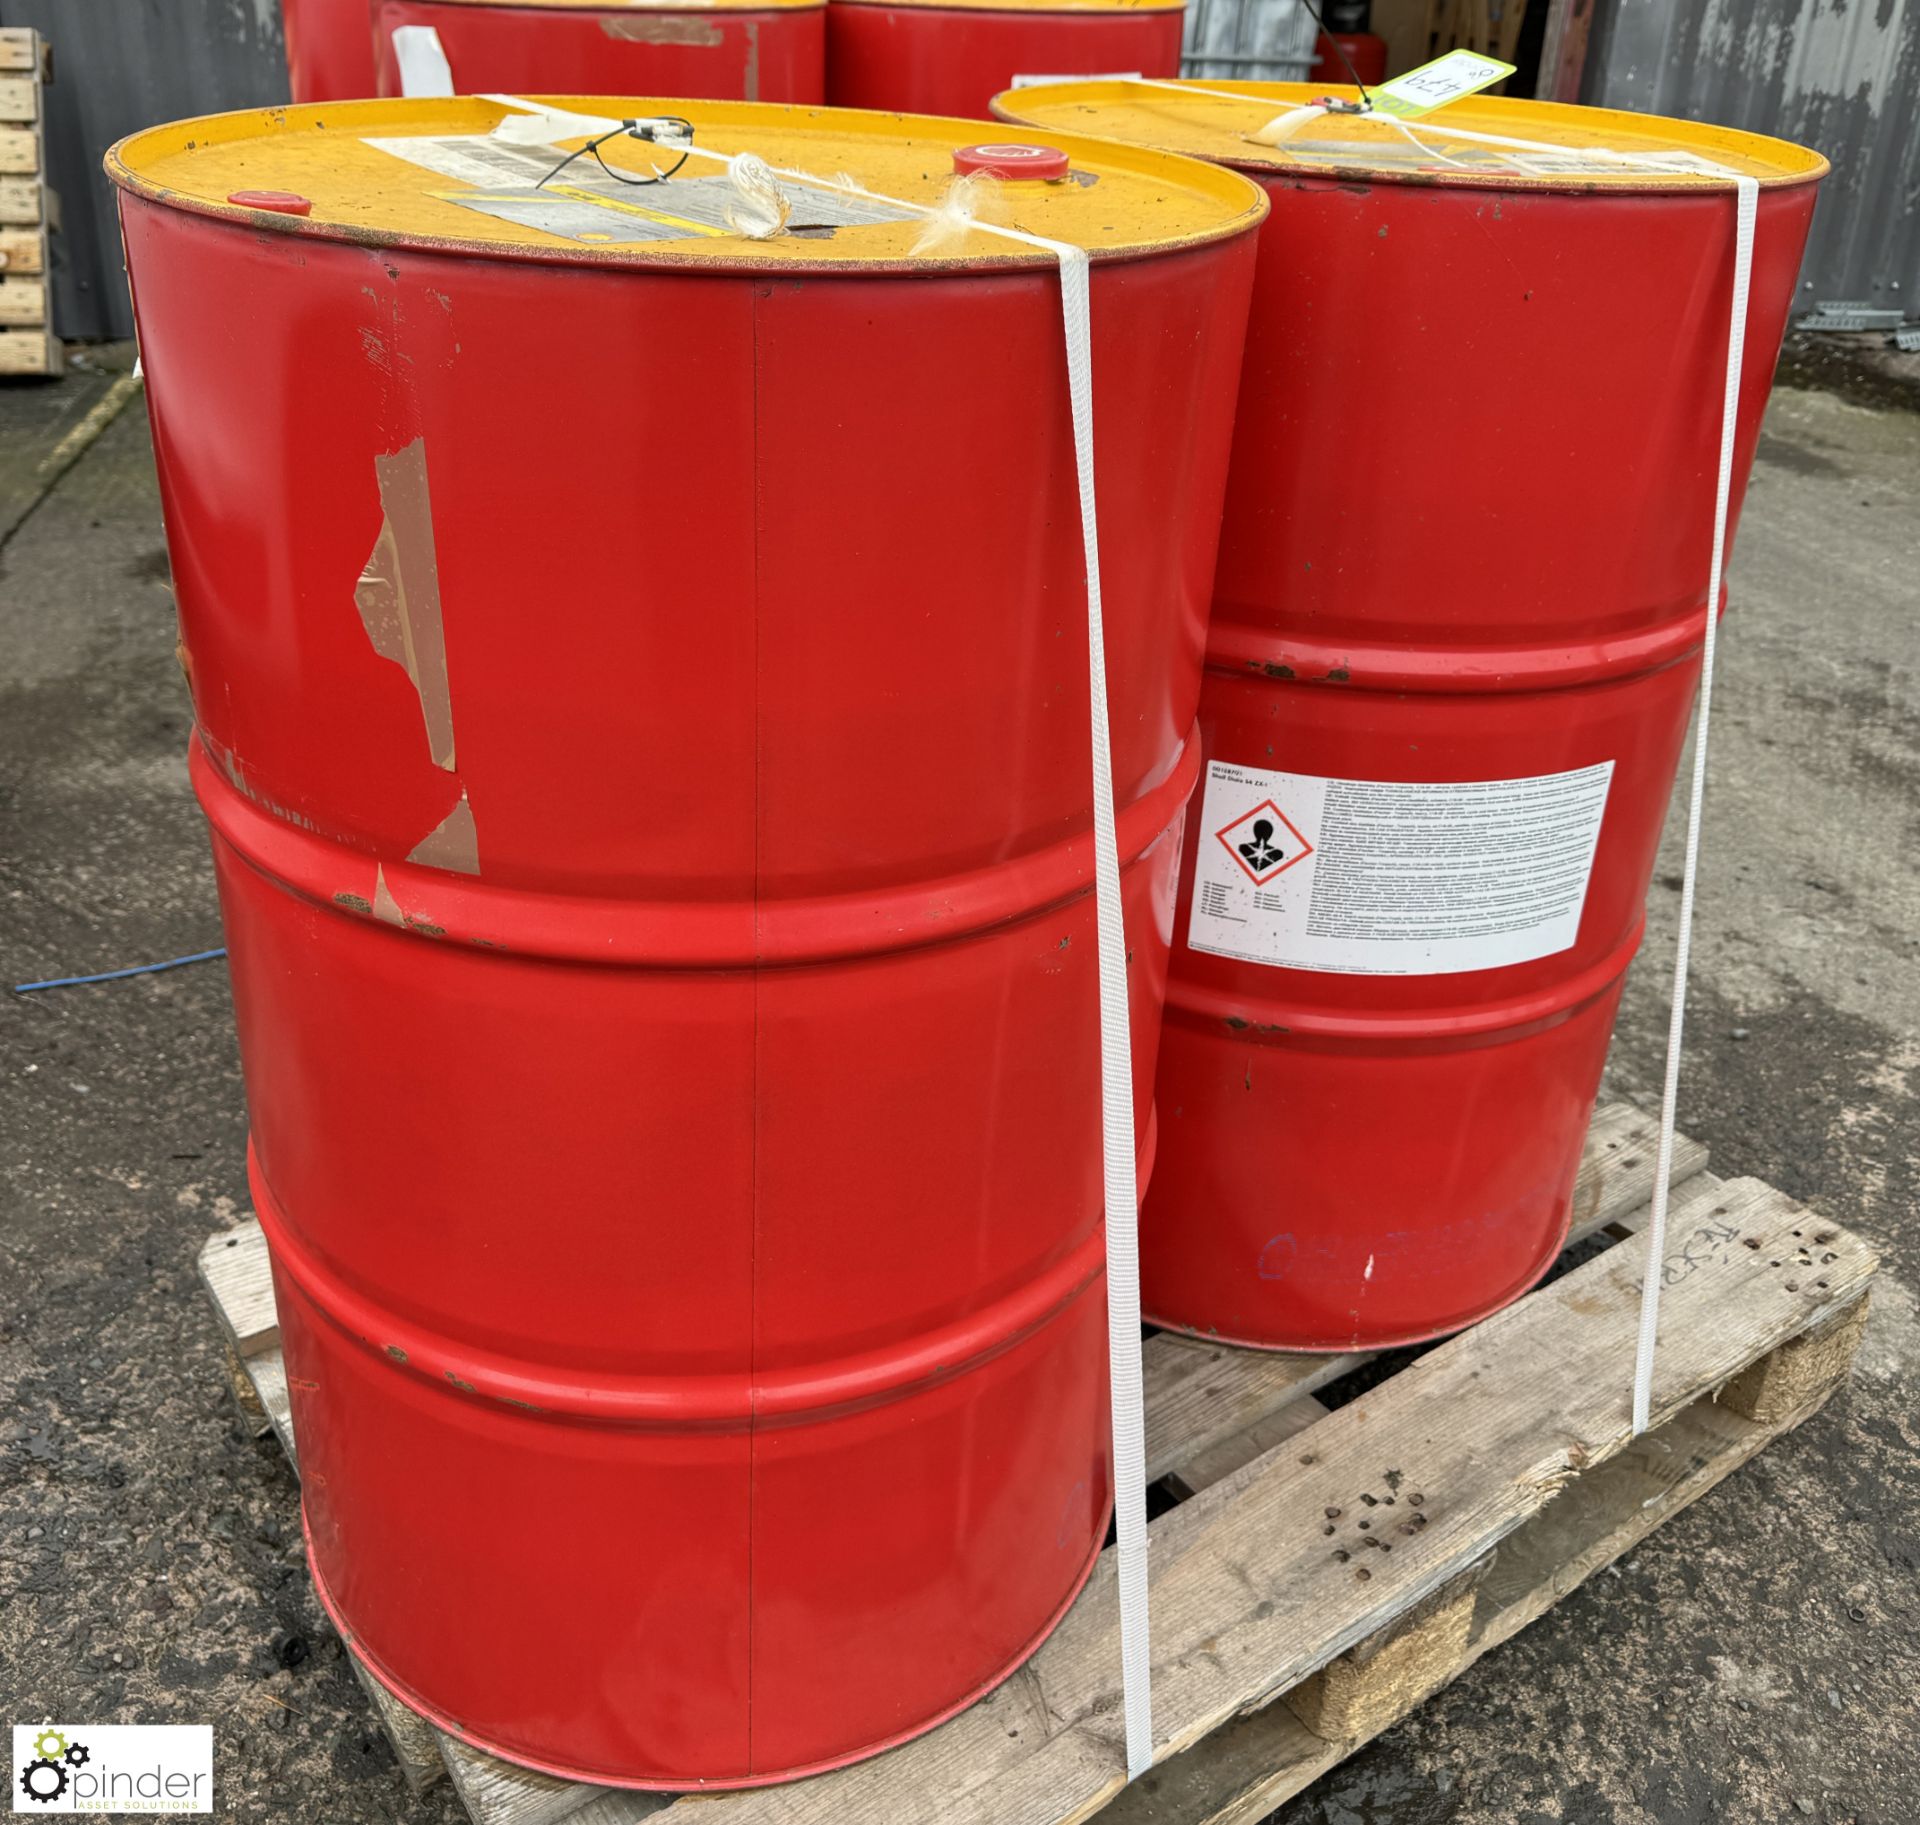 2 drums Shell Diala S4 Electrical Insulating Oil (ZX-I) (LOCATION: Carlisle – collection Tuesday - Image 2 of 6